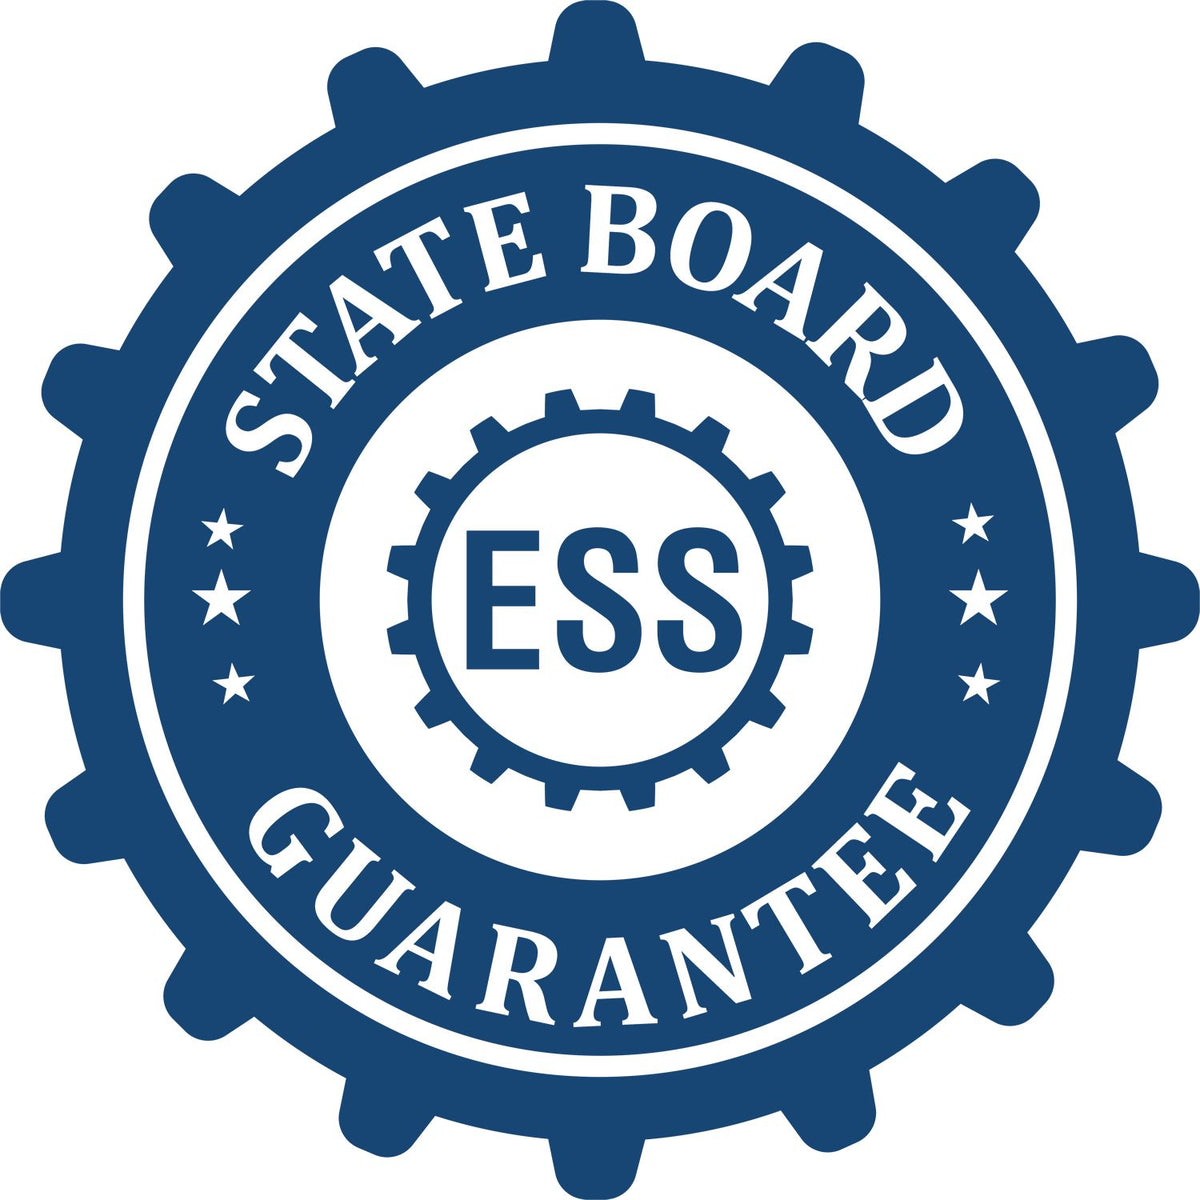 An emblem in a gear shape illustrating a state board guarantee for the Heavy Duty Cast Iron Missouri Architect Embosser product.